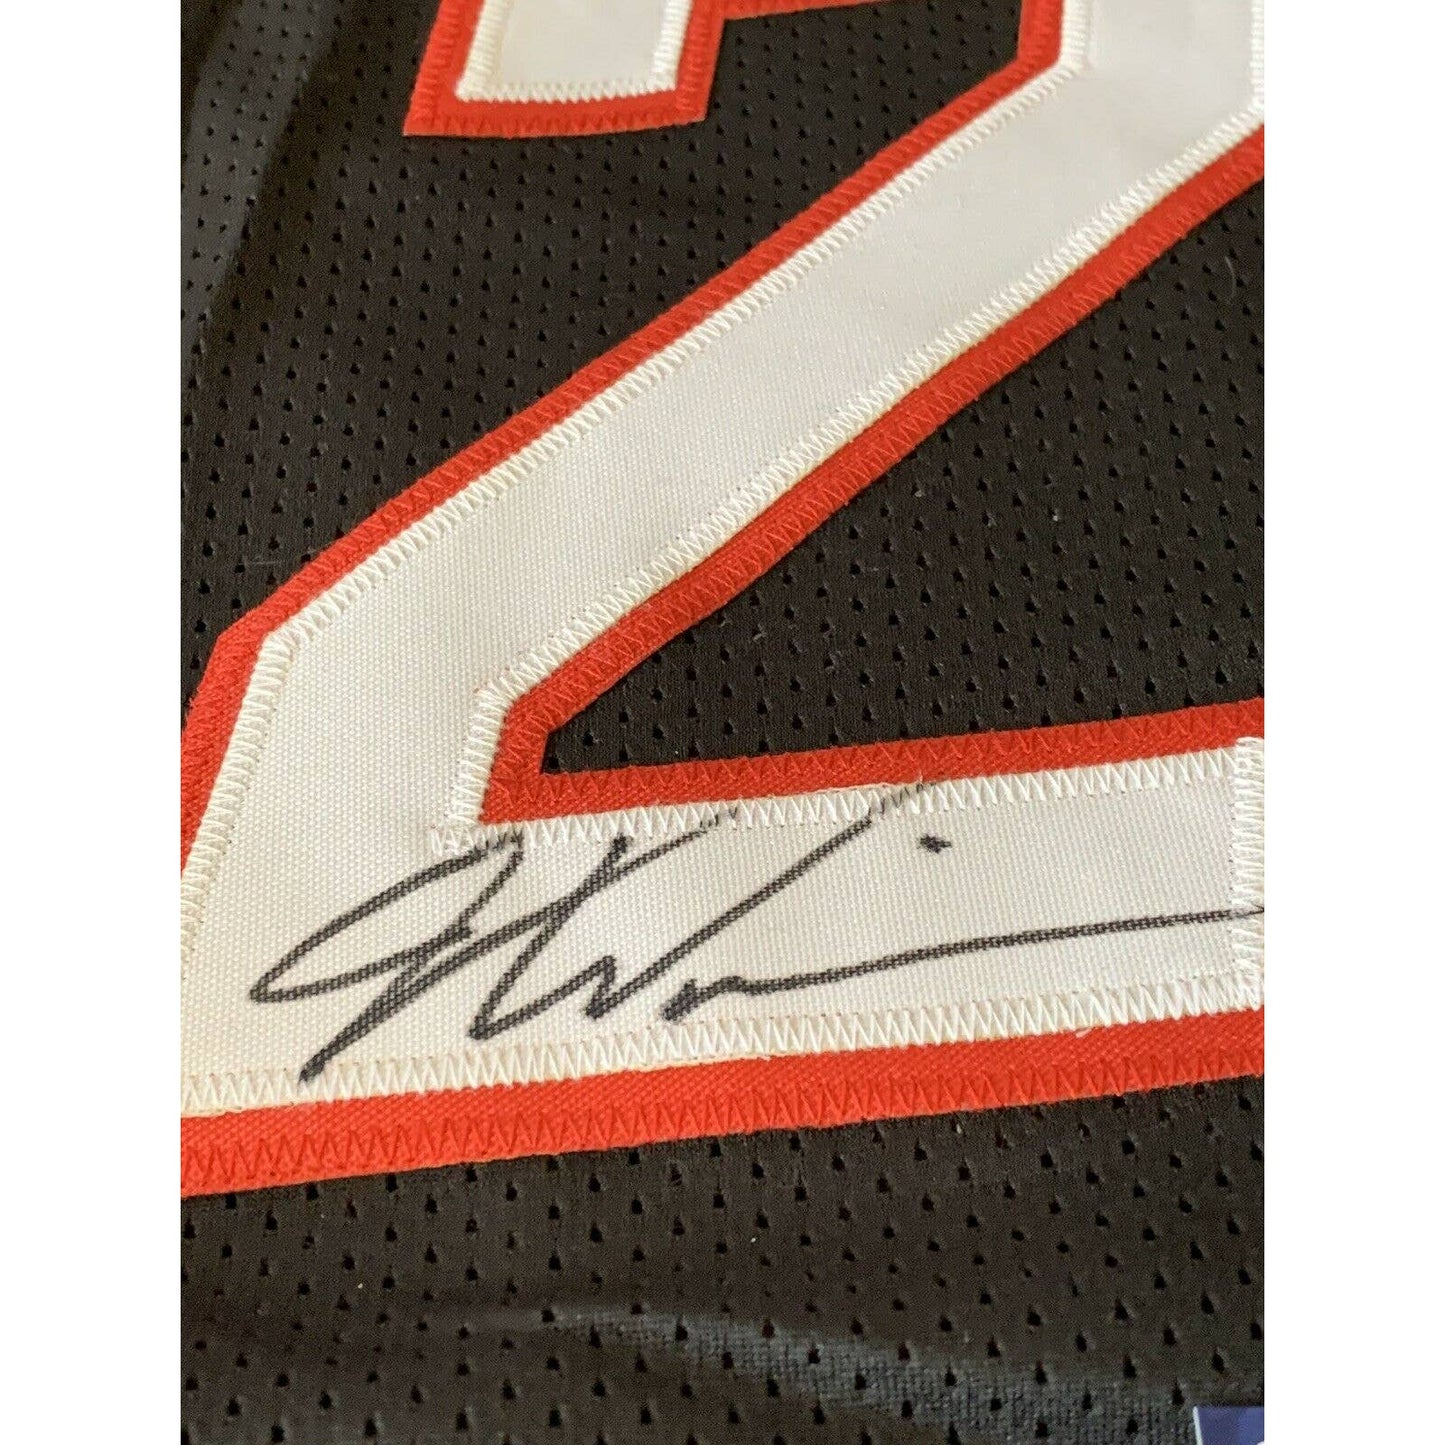 Justise Winslow Autographed/Signed Jersey PSA/DNA COA Miami Heat Justice - TreasuresEvolved